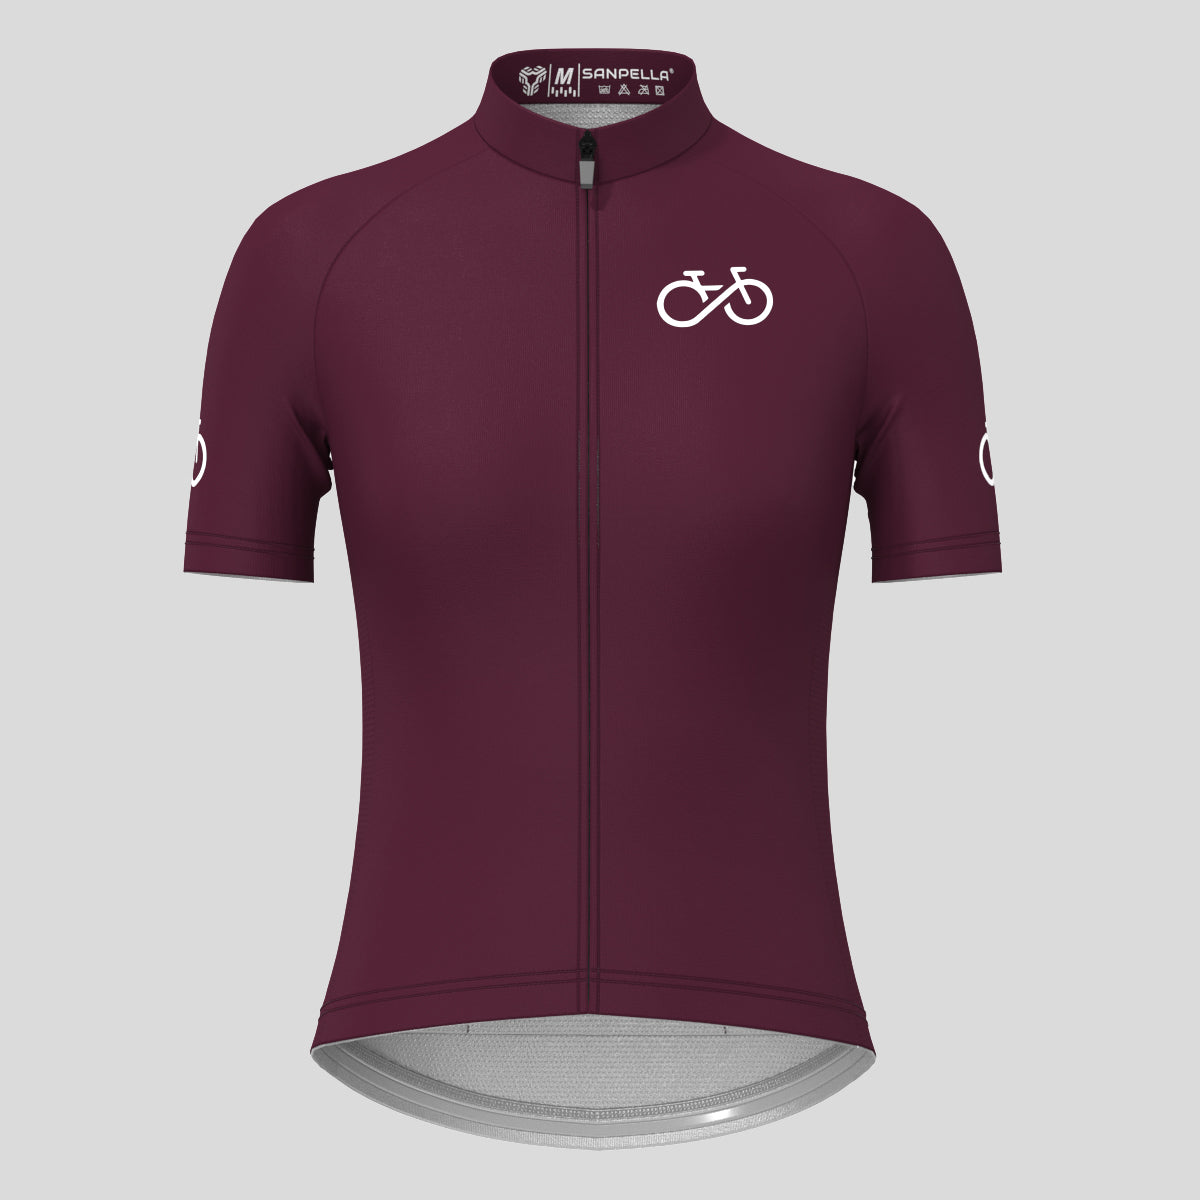 Ride Forever Women's Cycling Jersey - Burgundy